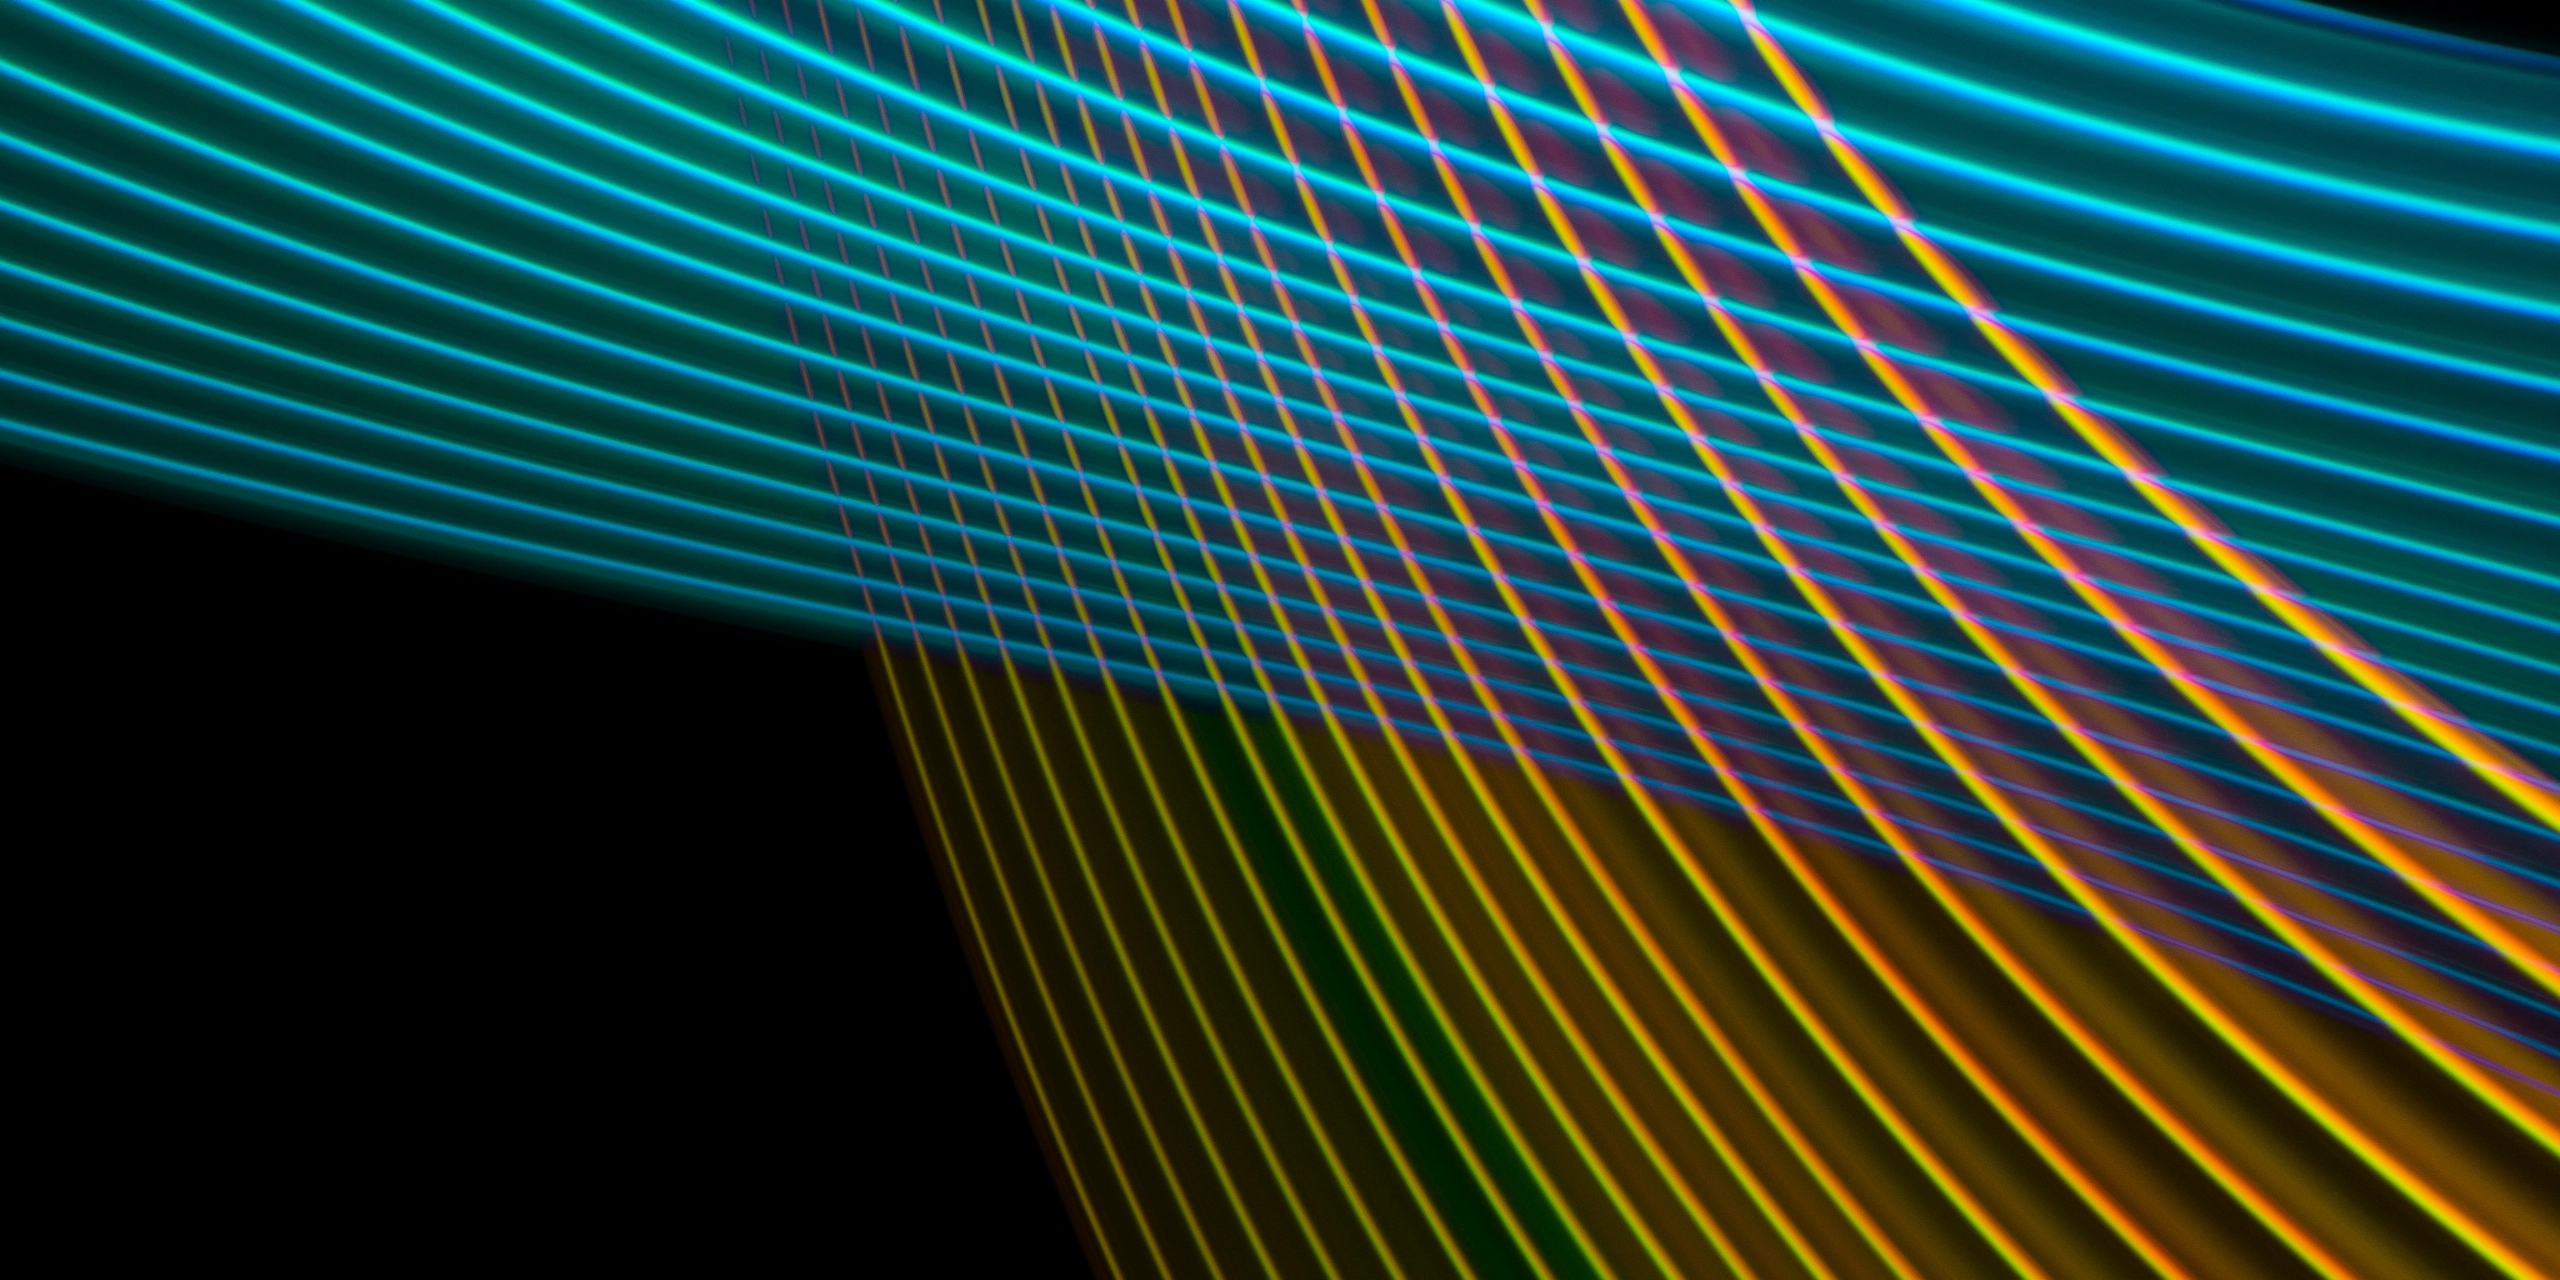 Futuristic blue curved and golden lines interlaced. Virtual environment. 3D.